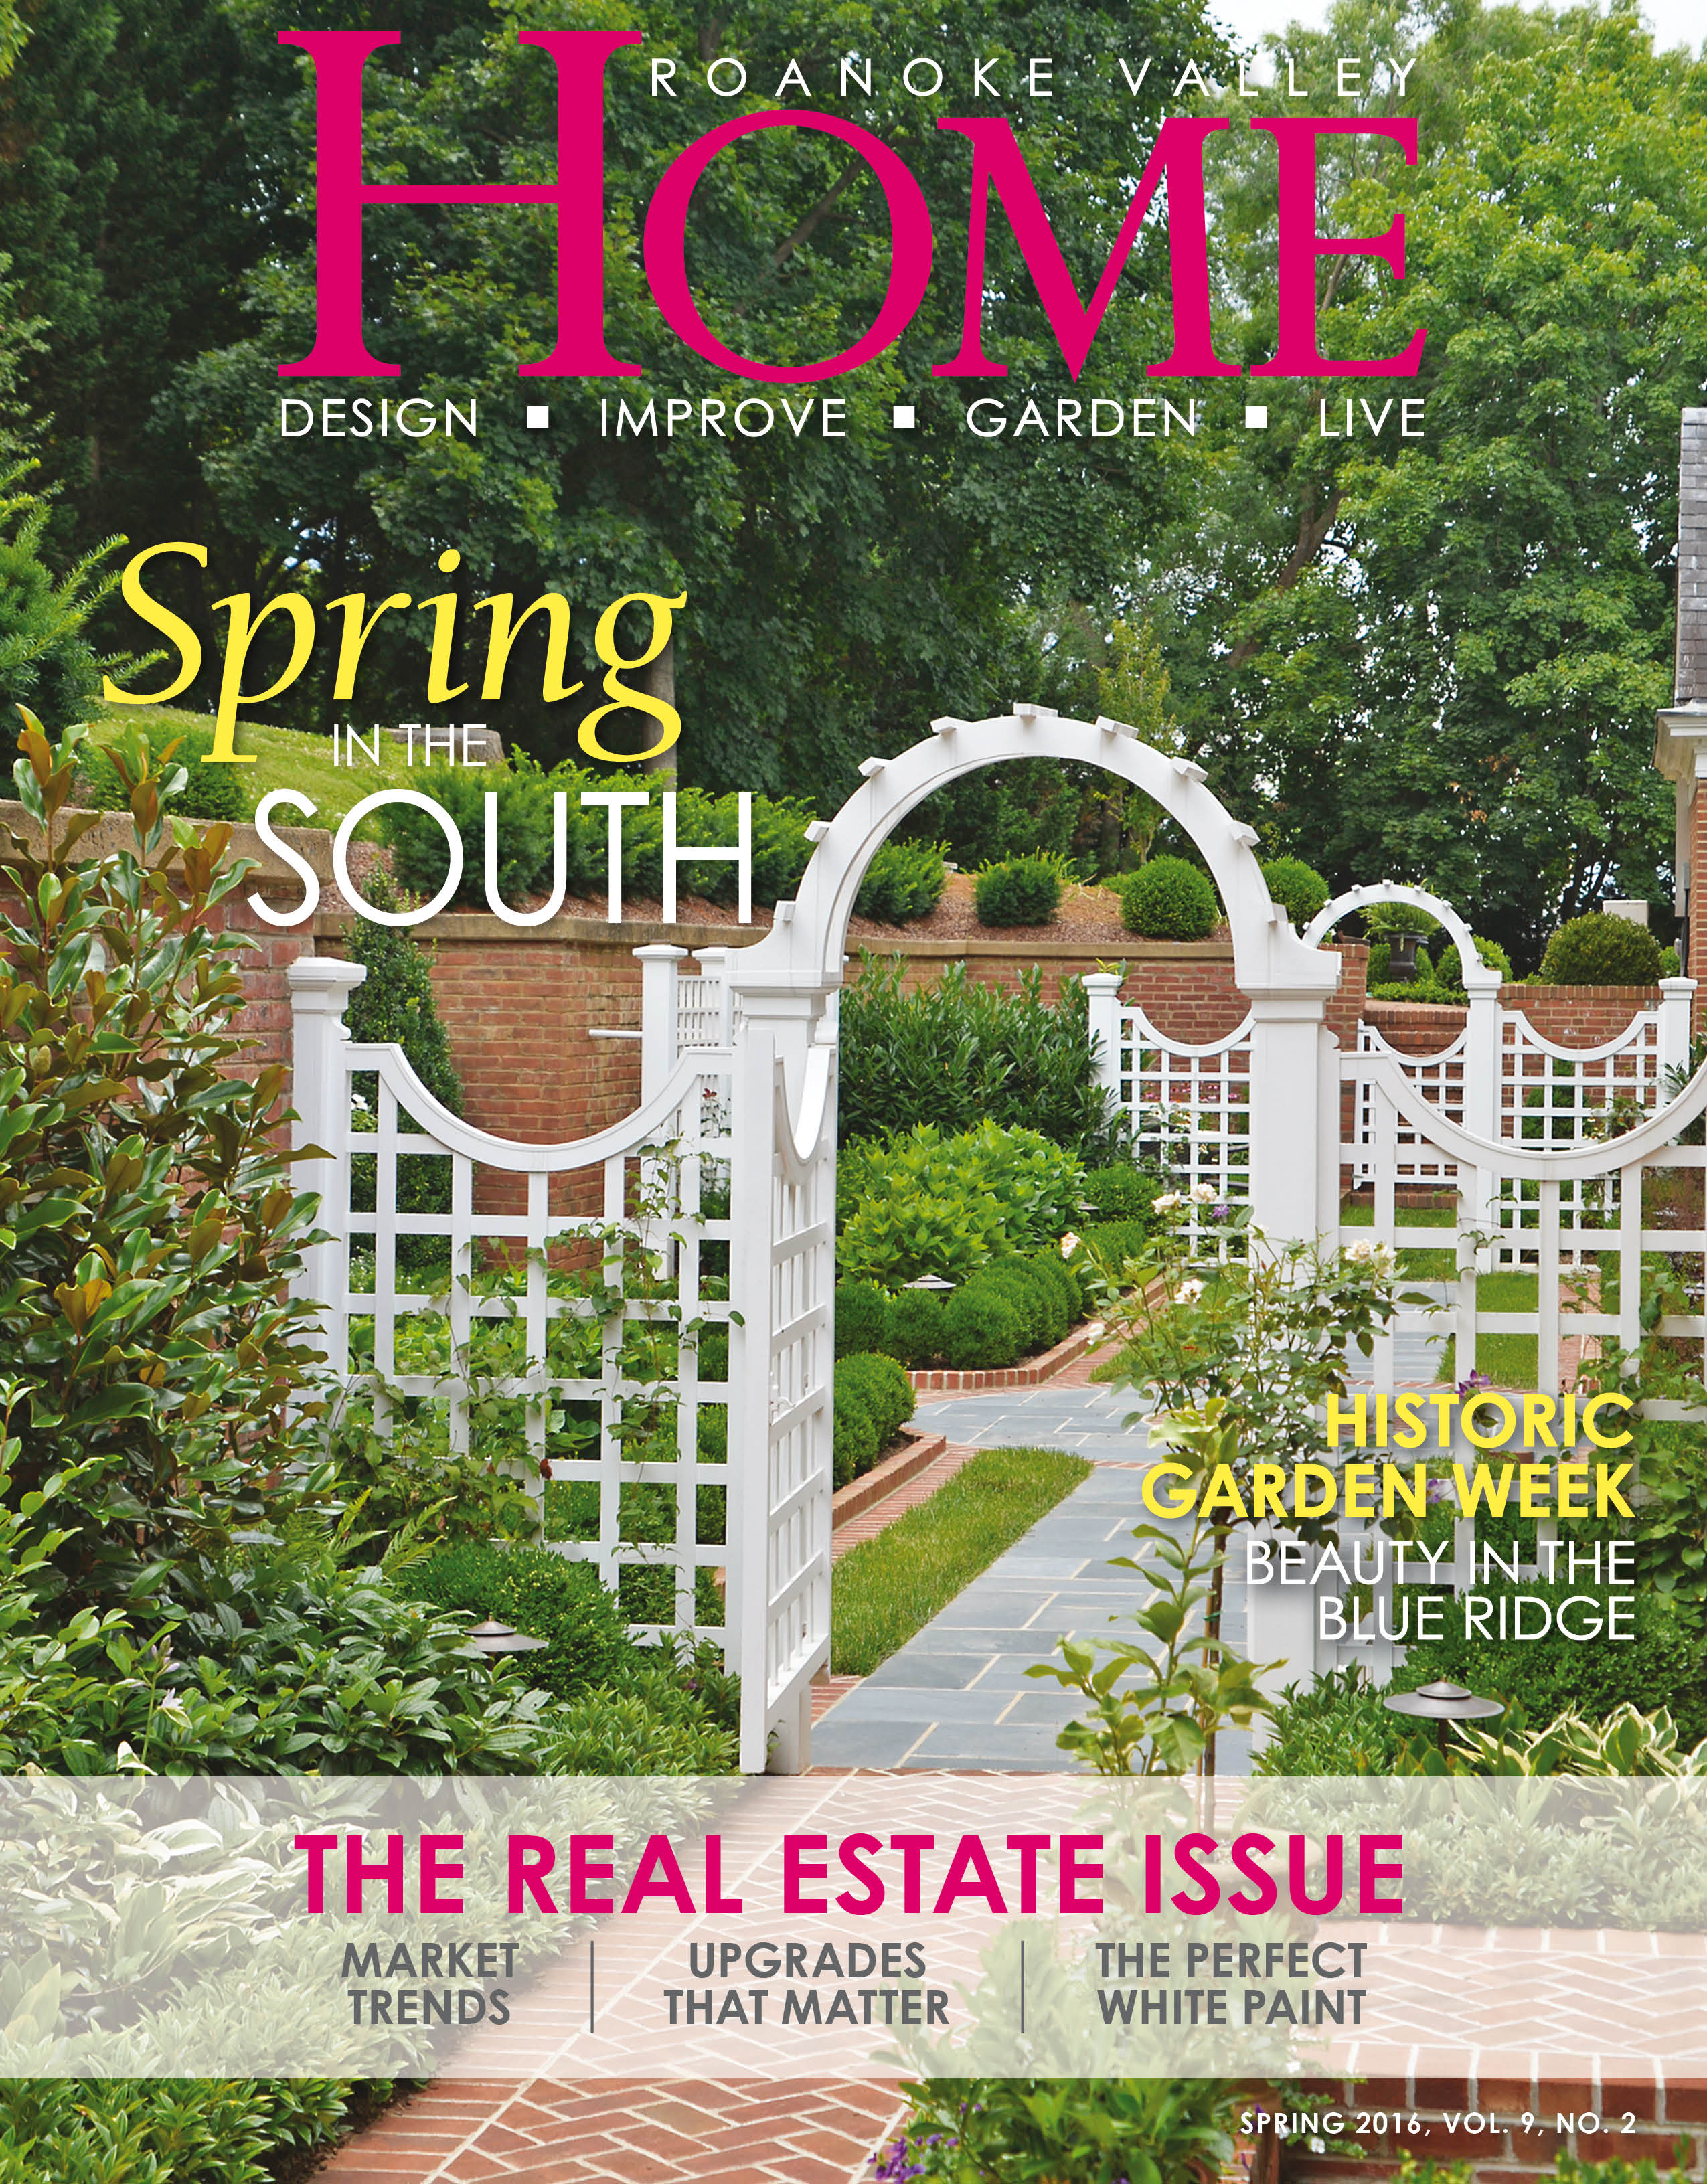 The Real Estate Issue 2016 – Roanoke Valley Home Magazine